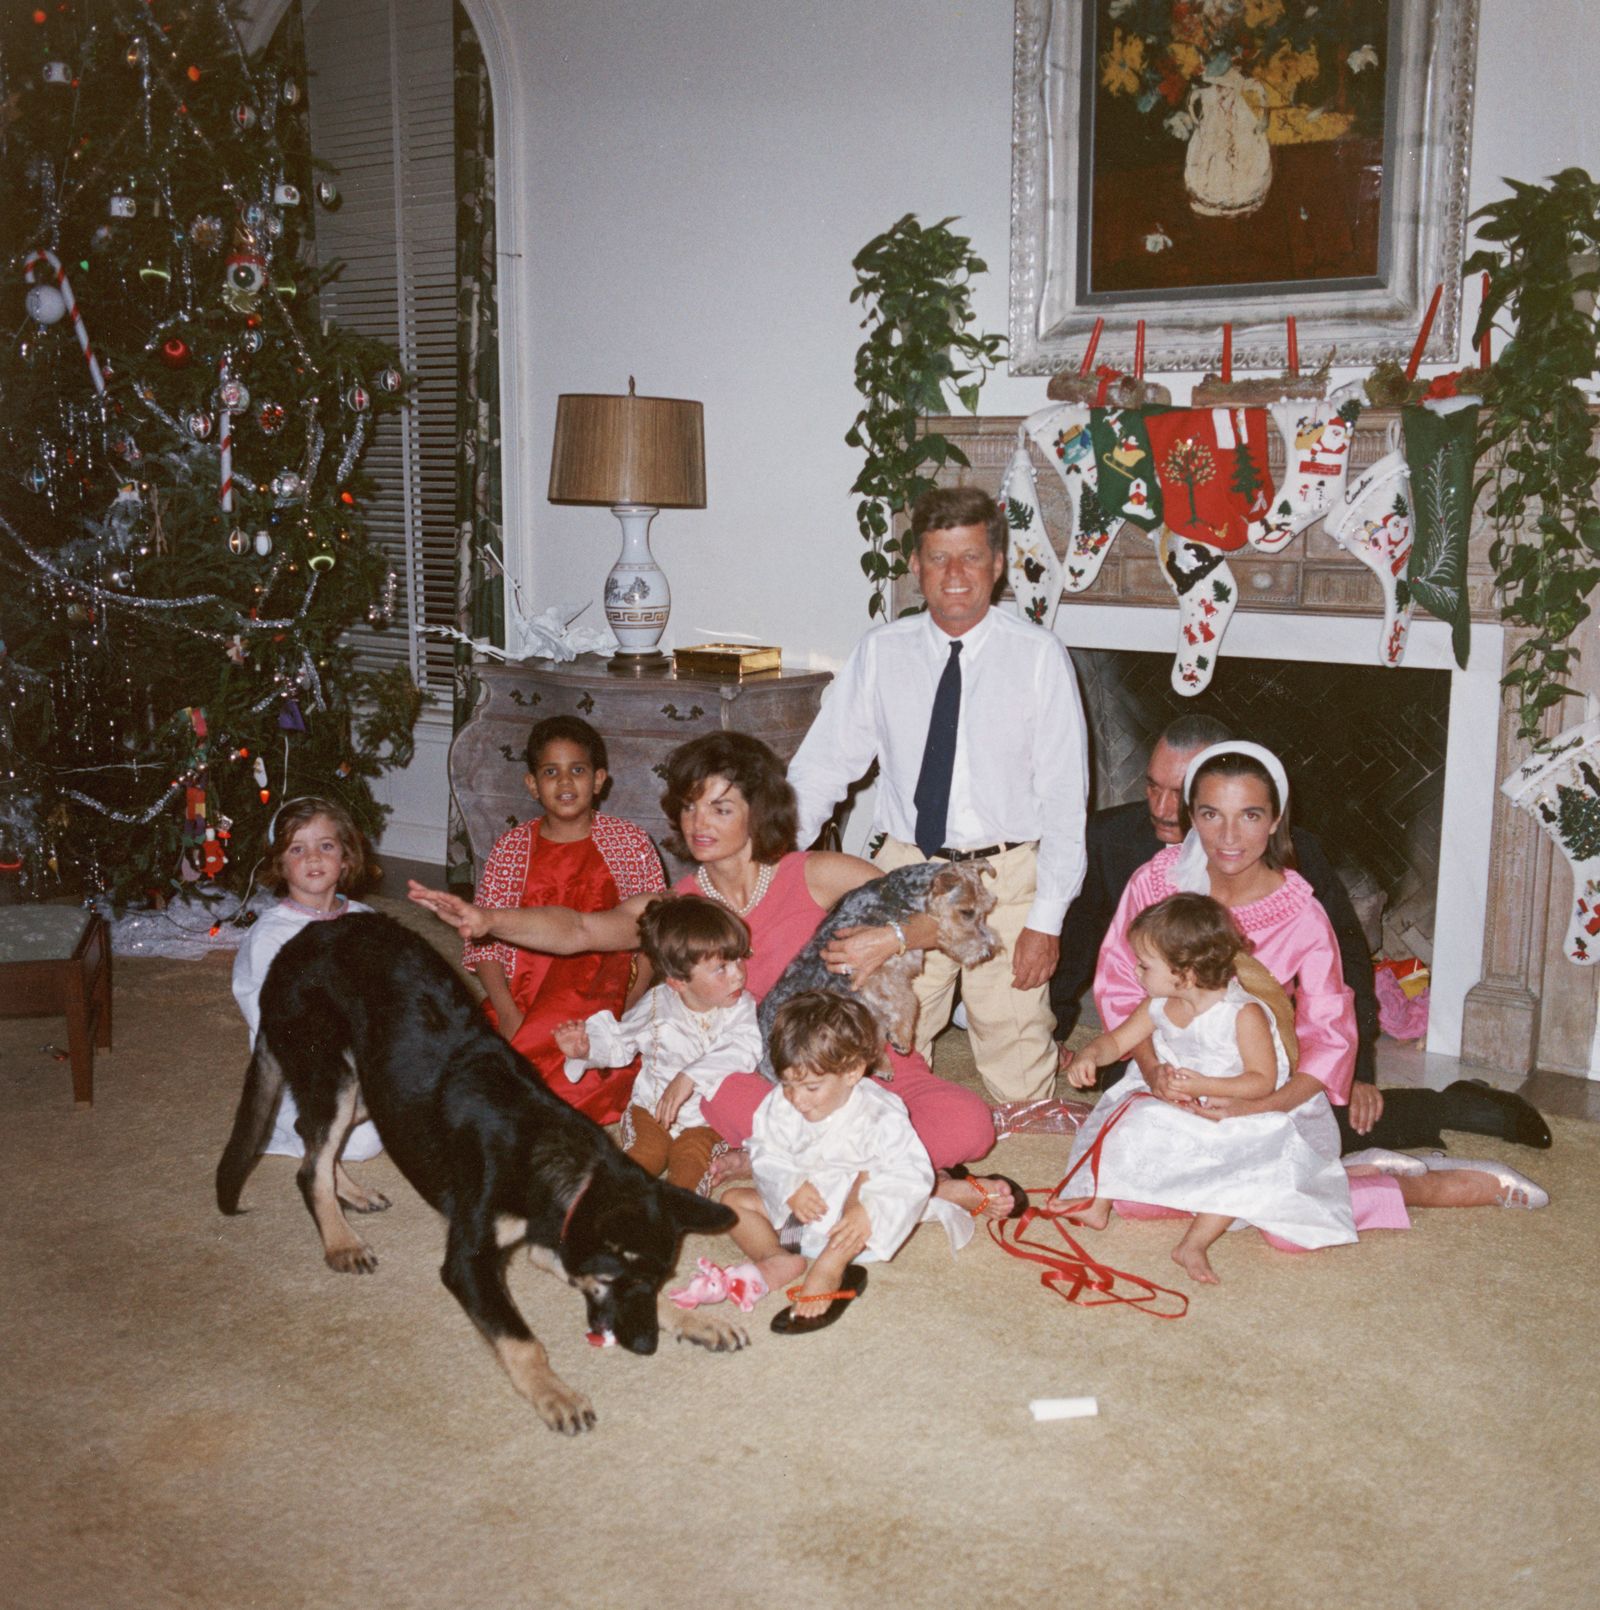 U.S. President John F. Kennedy (1917 - 1963) (C) and First Lady Jacqueline Kennedy (1929 - 1994) pose with their family on Christmas Day at the White House, Washington, D.C., December 25, 1962. (L-R): Caroline Kennedy, unidentified, John F. Kennedy Jr. (1960 - 1999), Anthony Radziwill (1959 - 1999), Prince Stanislaus Radziwill, Lee Radziwill, and their daughter, Ann Christine Radziwill. (Photo by John F. Kennedy Library/Courtesy of Getty Images)